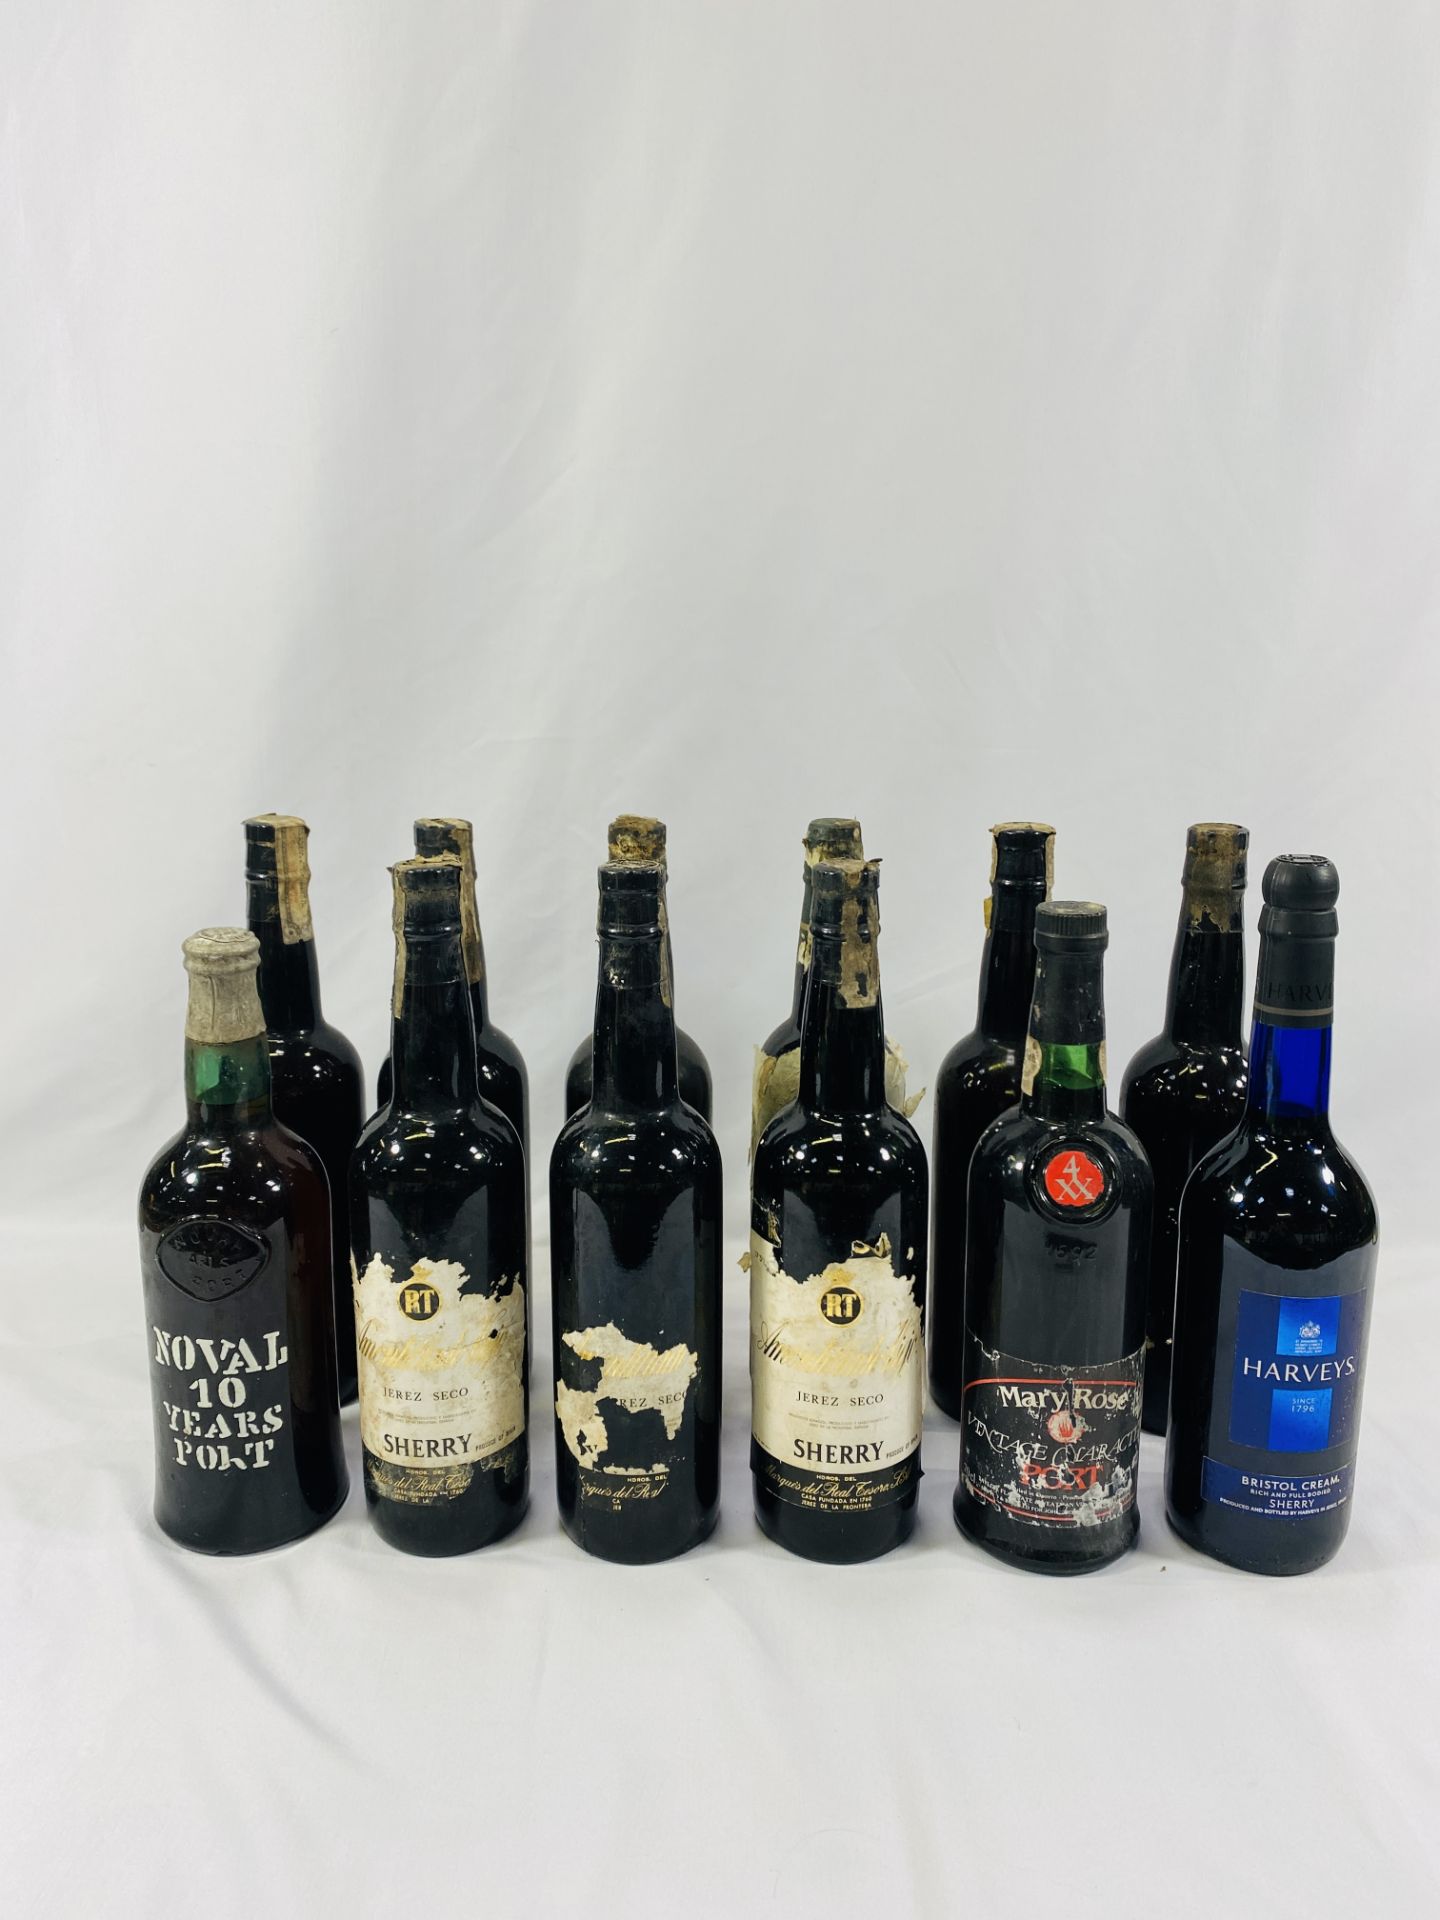 Ten bottles of sherry and two bottles of port